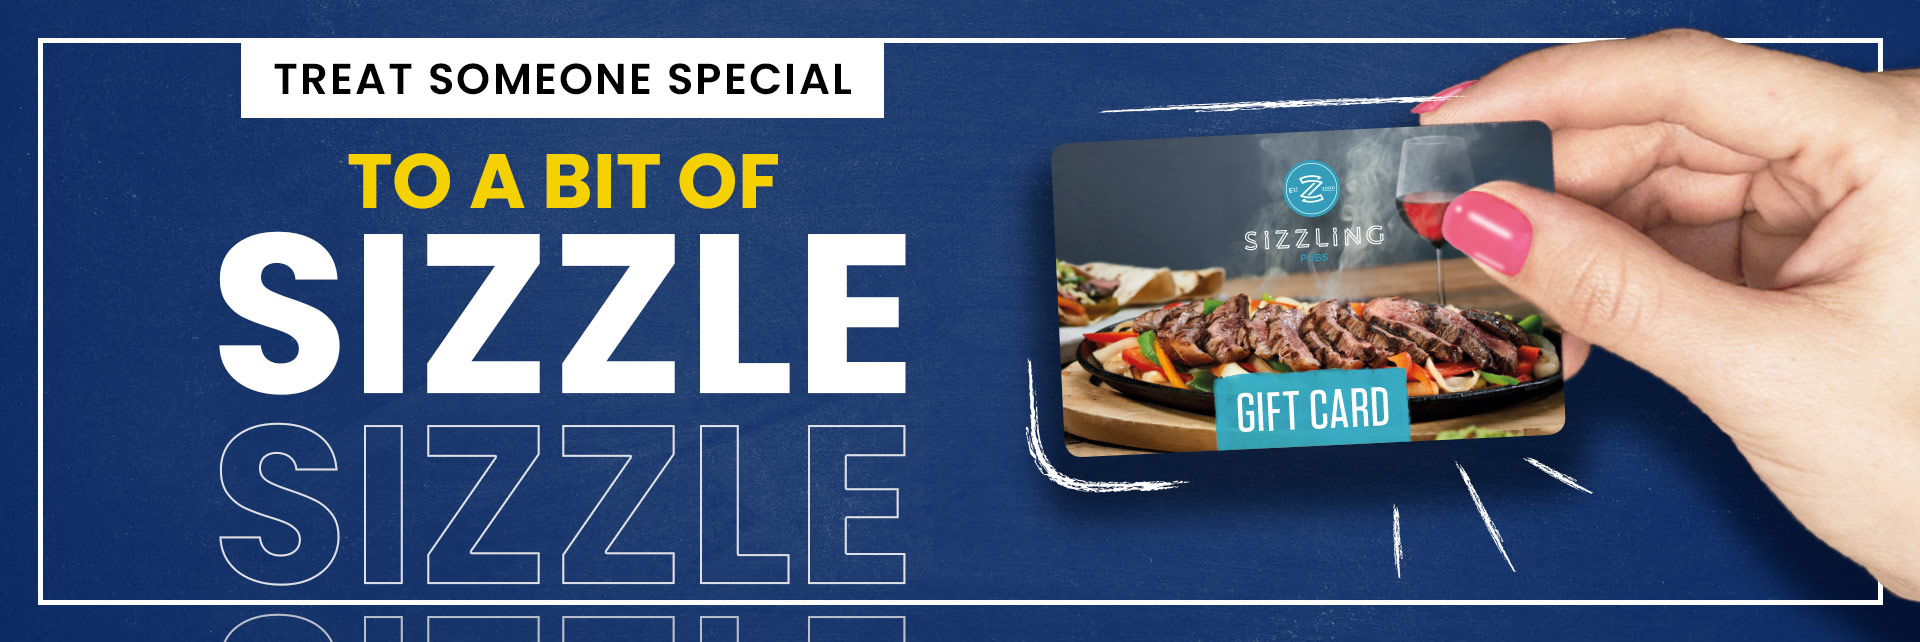 Sizzling Pubs Gift Card at The Highwayman in Gateshead